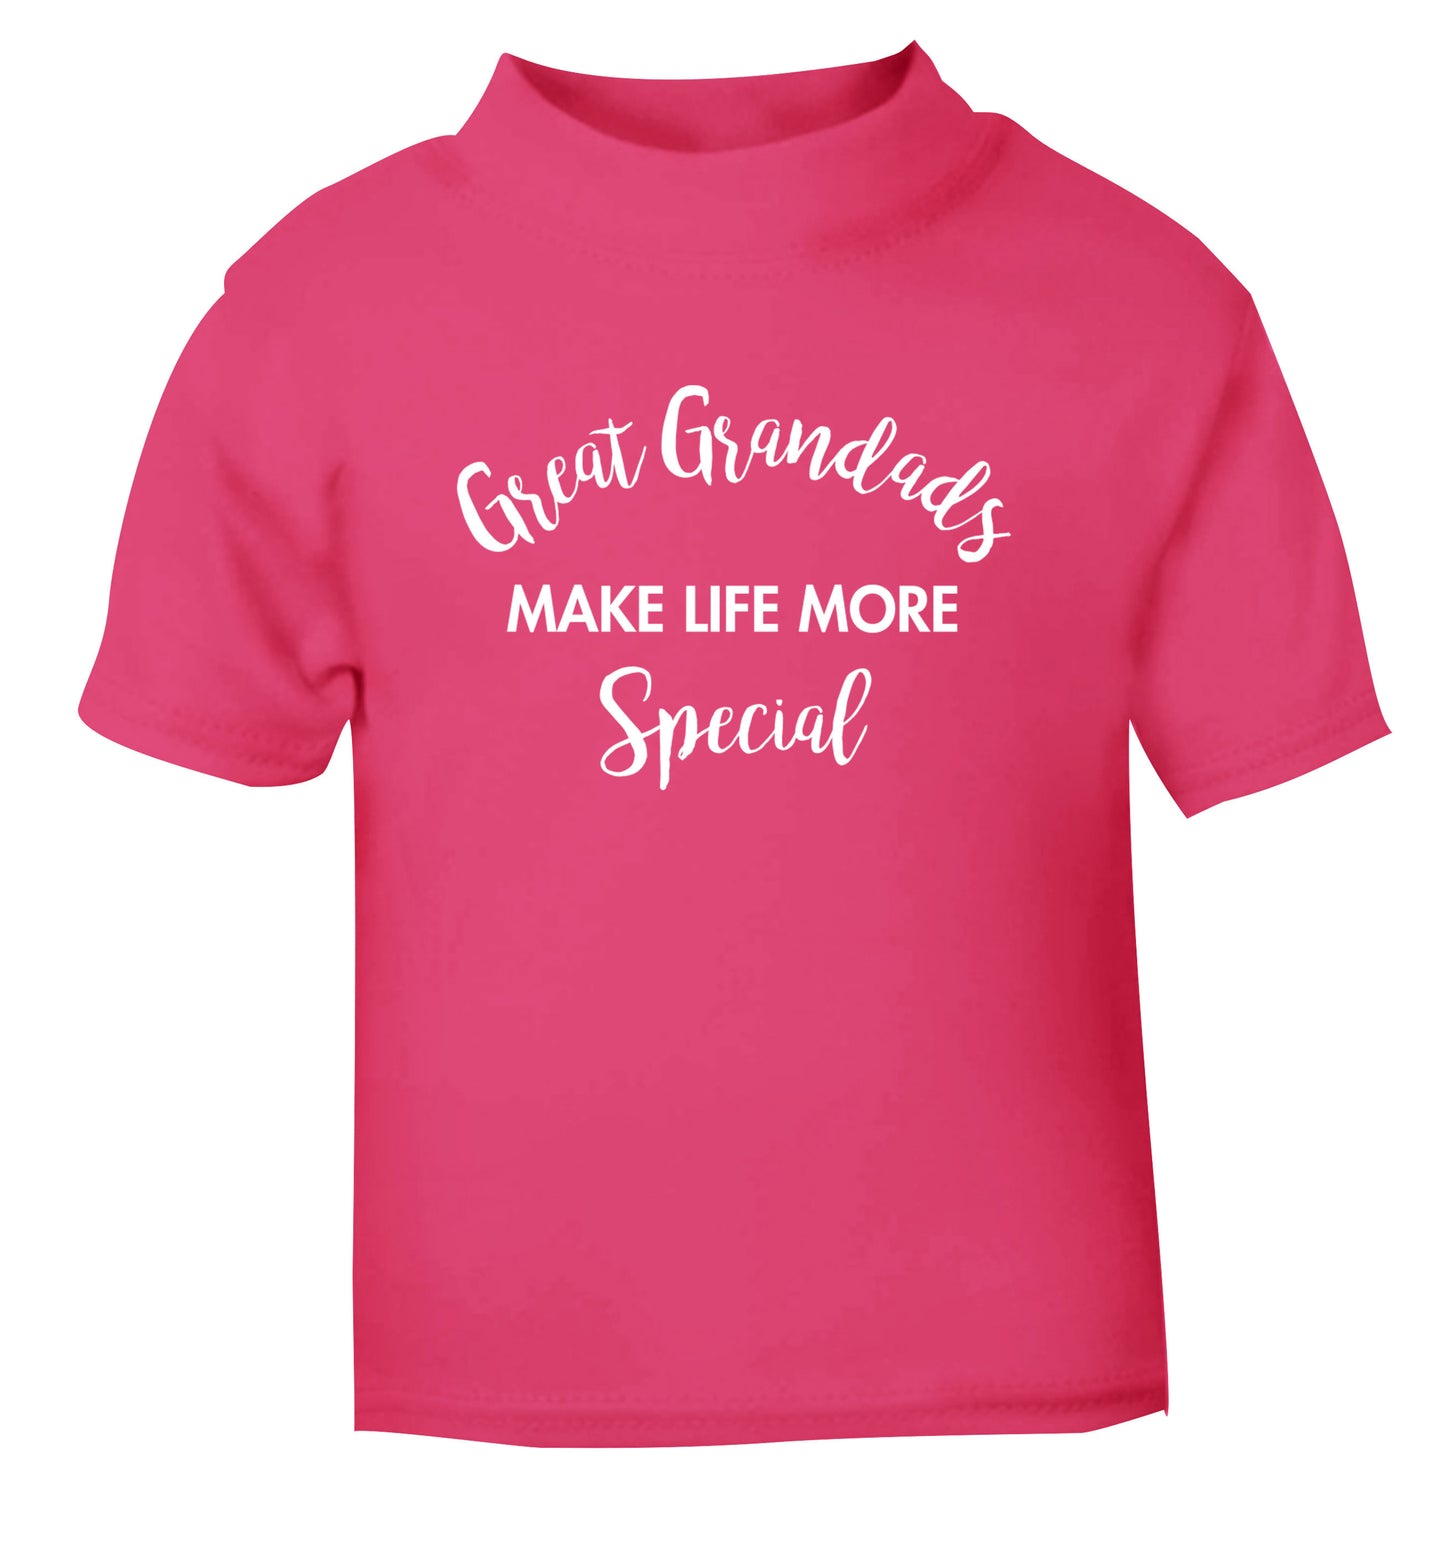 Great Grandads make life more special pink Baby Toddler Tshirt 2 Years